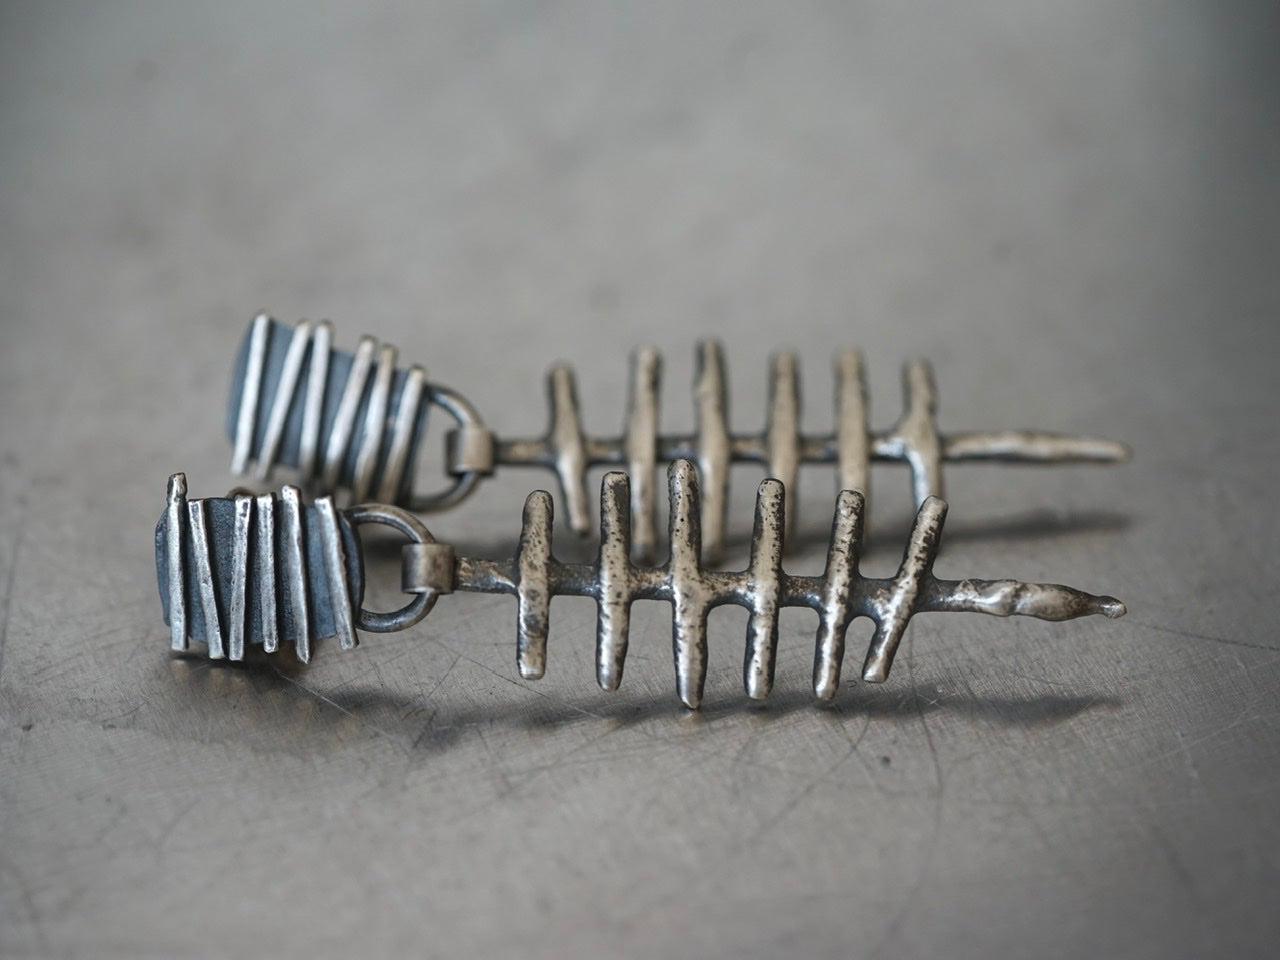 Remnants/ withered series, large skeletal sterling silver earrings